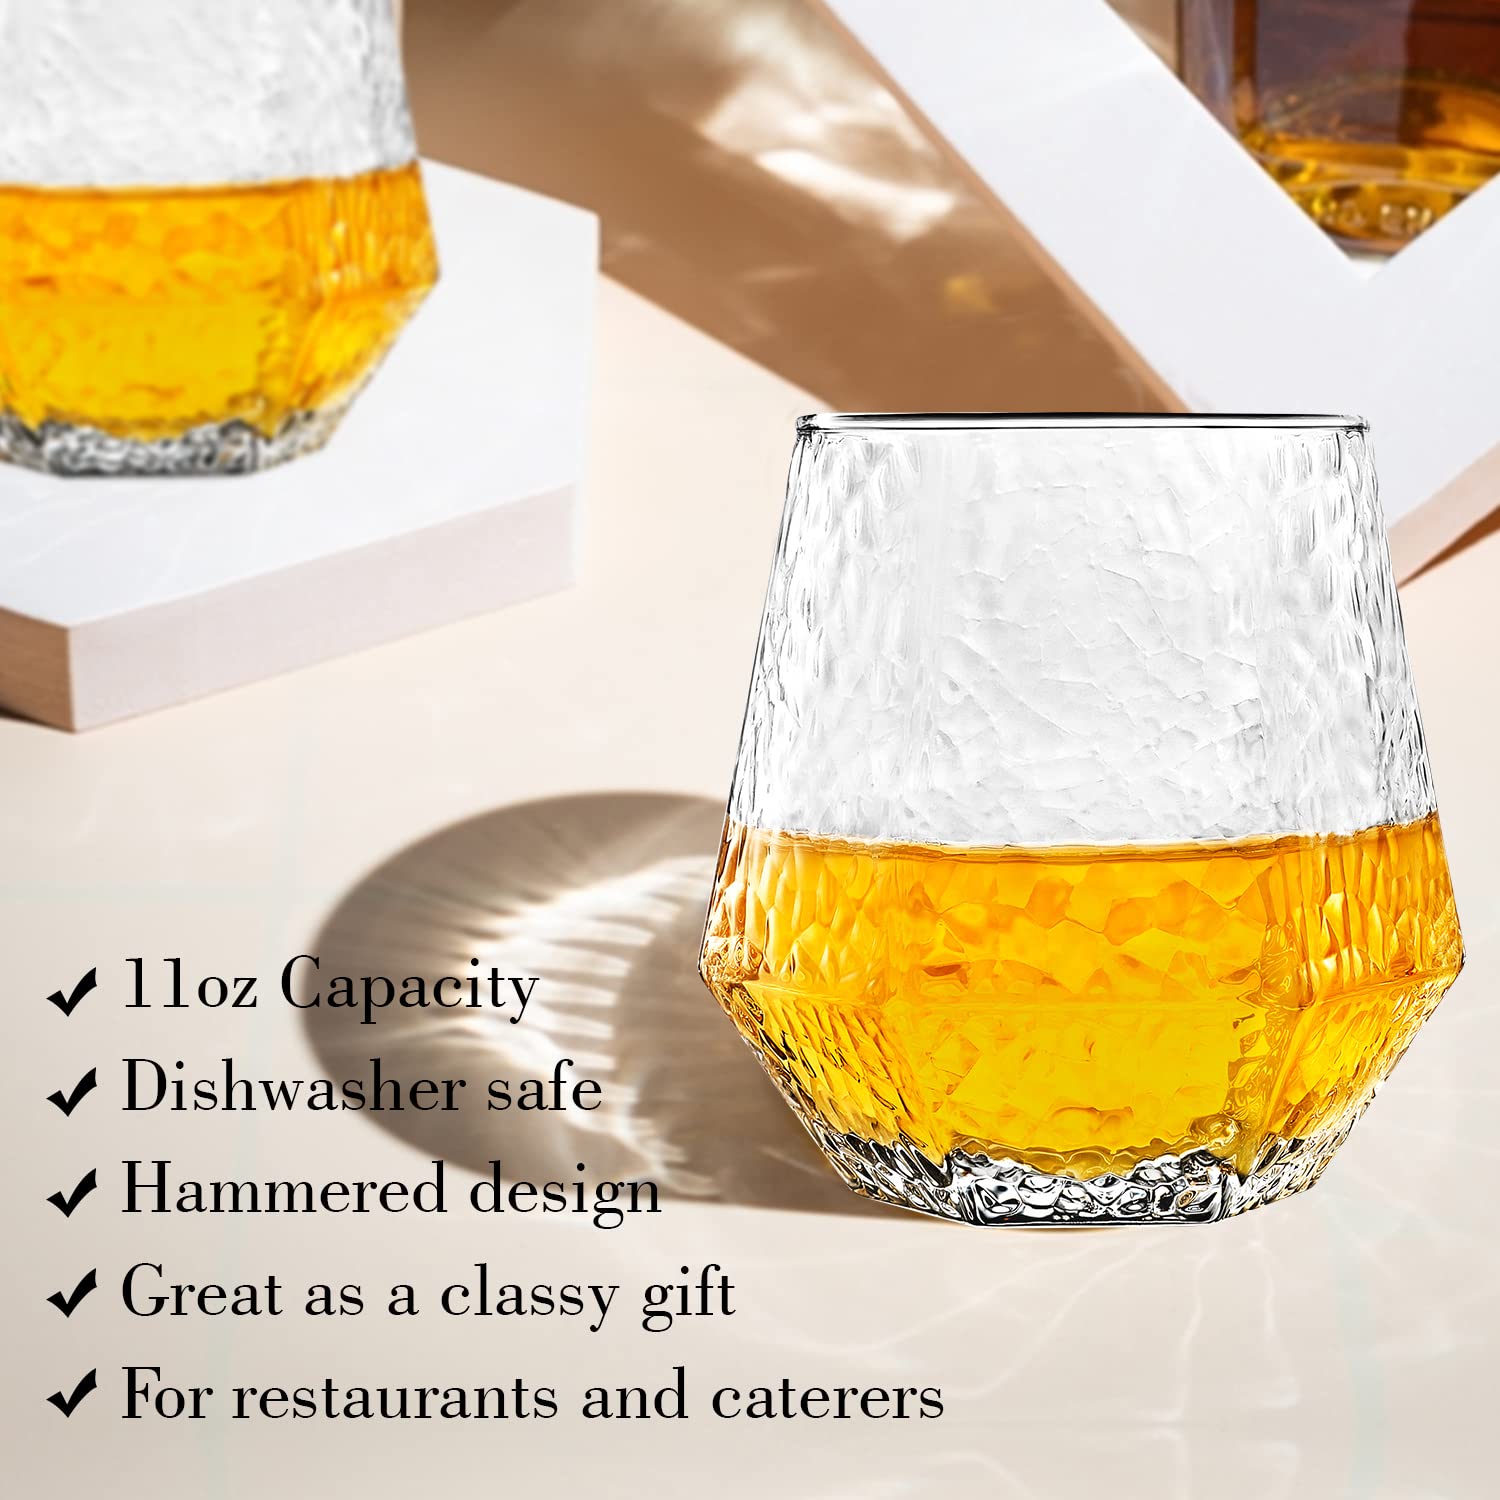 Diamond Glasses - Stemless Wine Glass Set of 6 - Geometric Tilting Design - Rolling Whiskey Glasses - Stem Less Anti Rocking Cup Diamonds Shaped - Tilted Glassware Drinking Tumblers for Wiskey/Wine